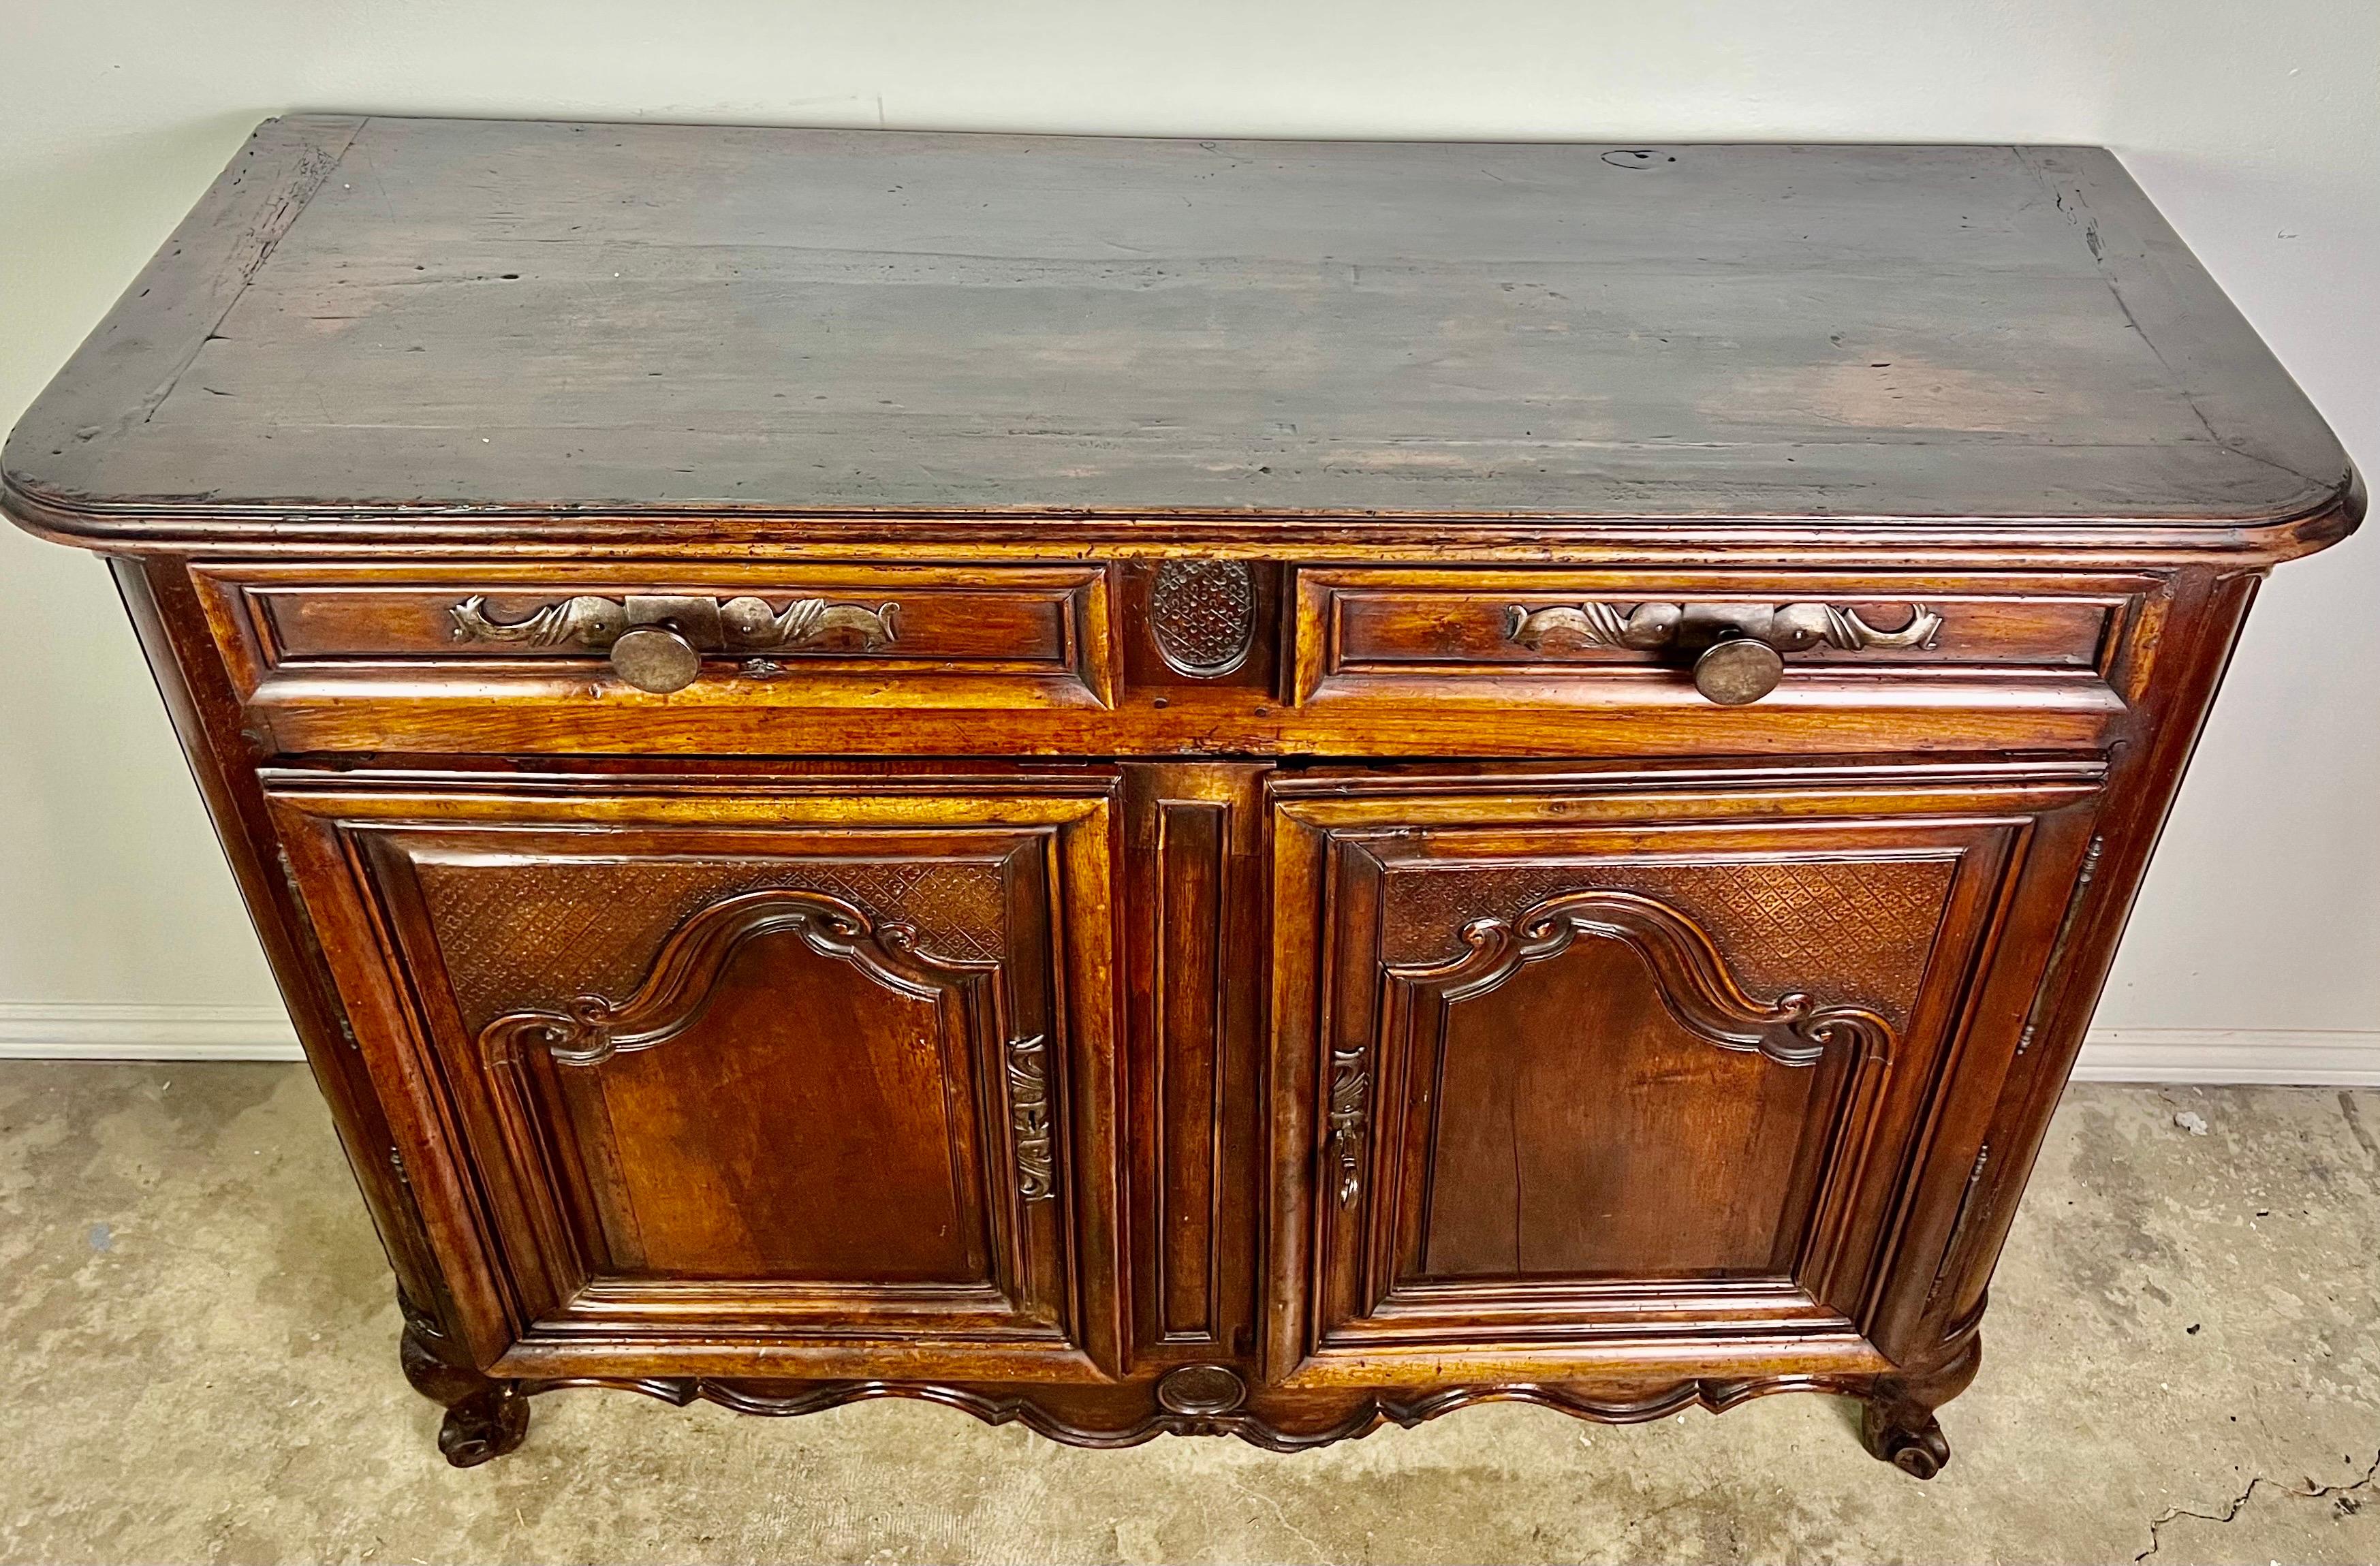 18th century French walnut Louis XV style buffet. The finish has developed a perfect patina that we long for. The buffet stands on four cabriole legs that end in rams head feet. There are two drawers and two doors with plenty of storage inside.